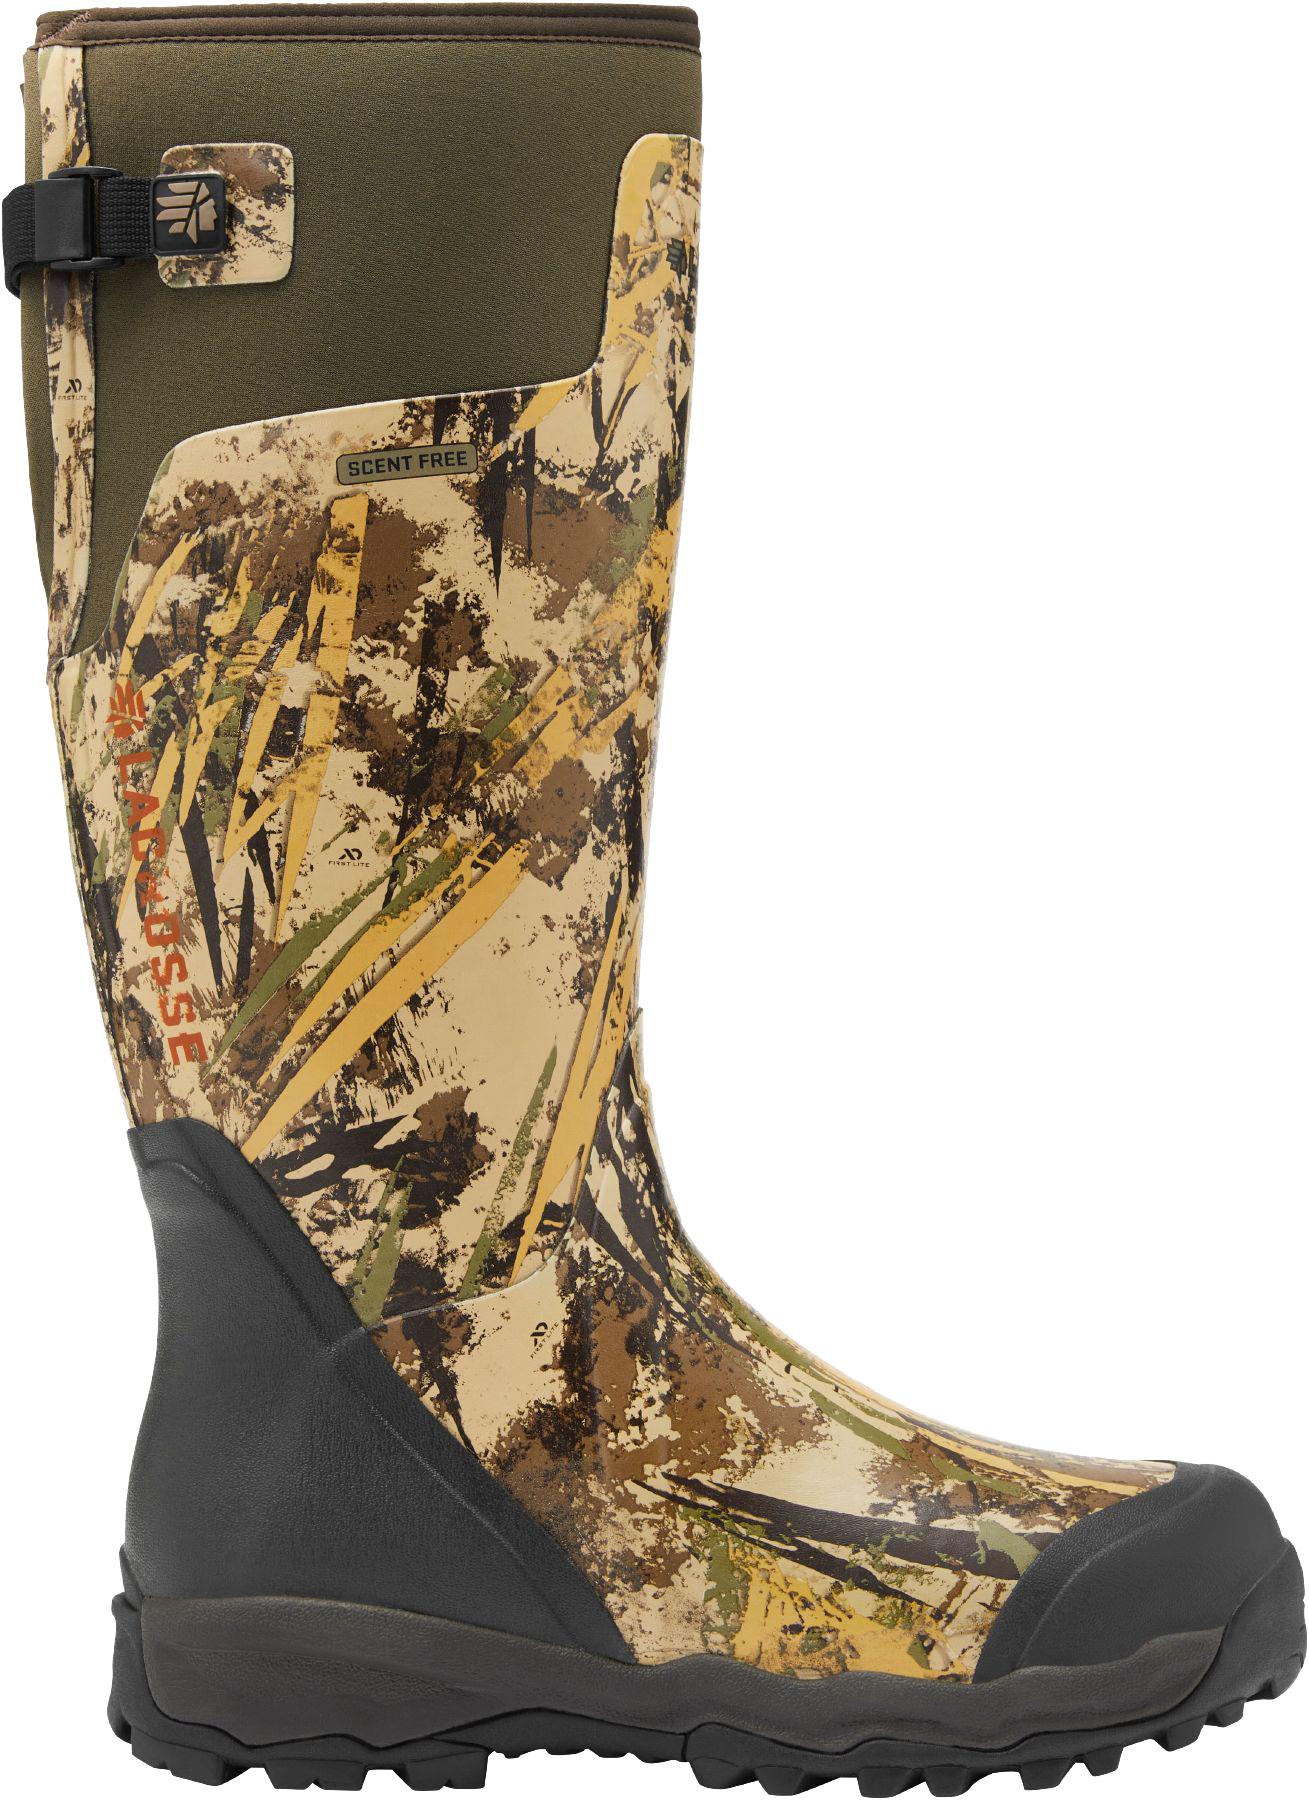 LaCrosse AlphaBurly Pro Hunting Boots for Men - First Lite Typha - 11M